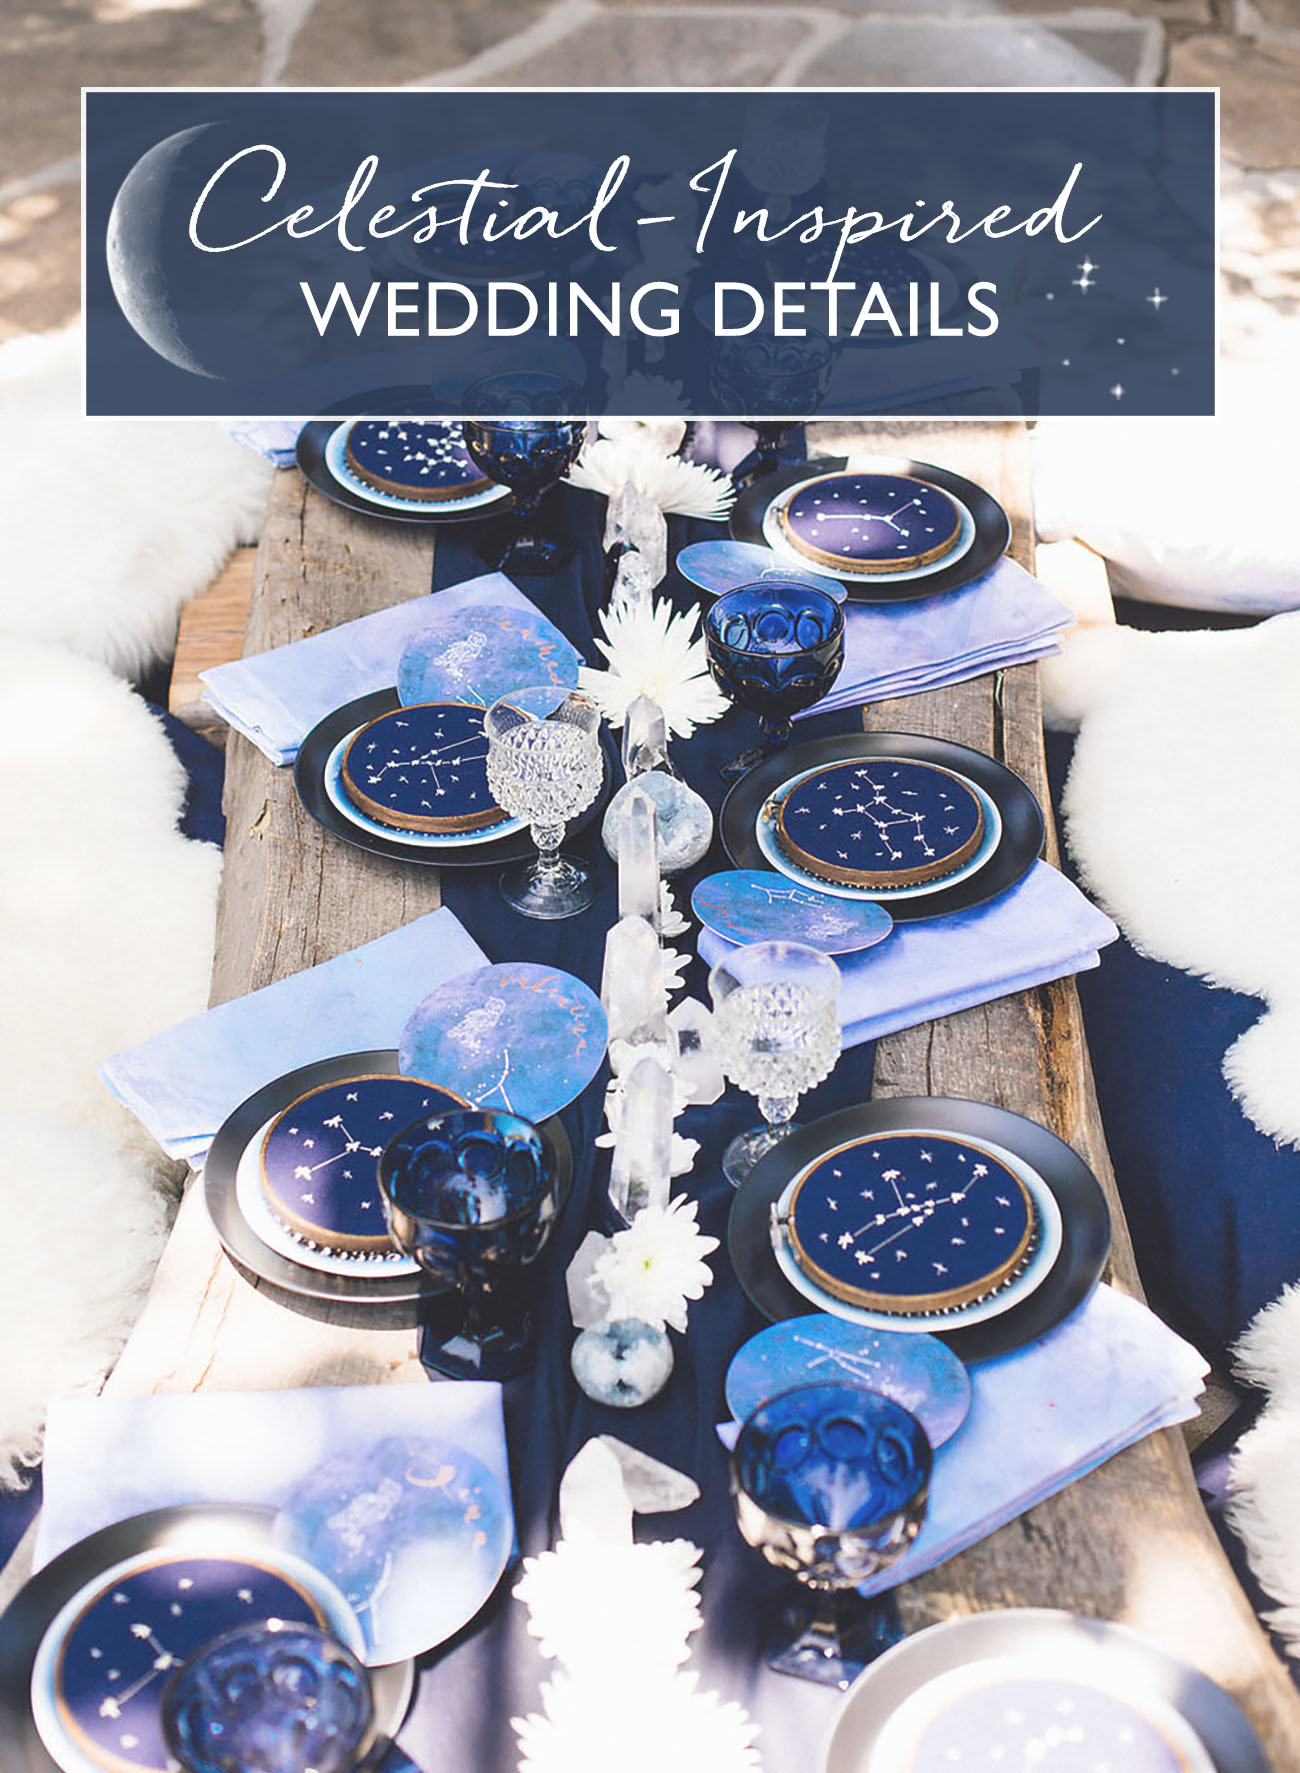 We?re Over the Moon for All These Celestial-Inspired Wedding Details